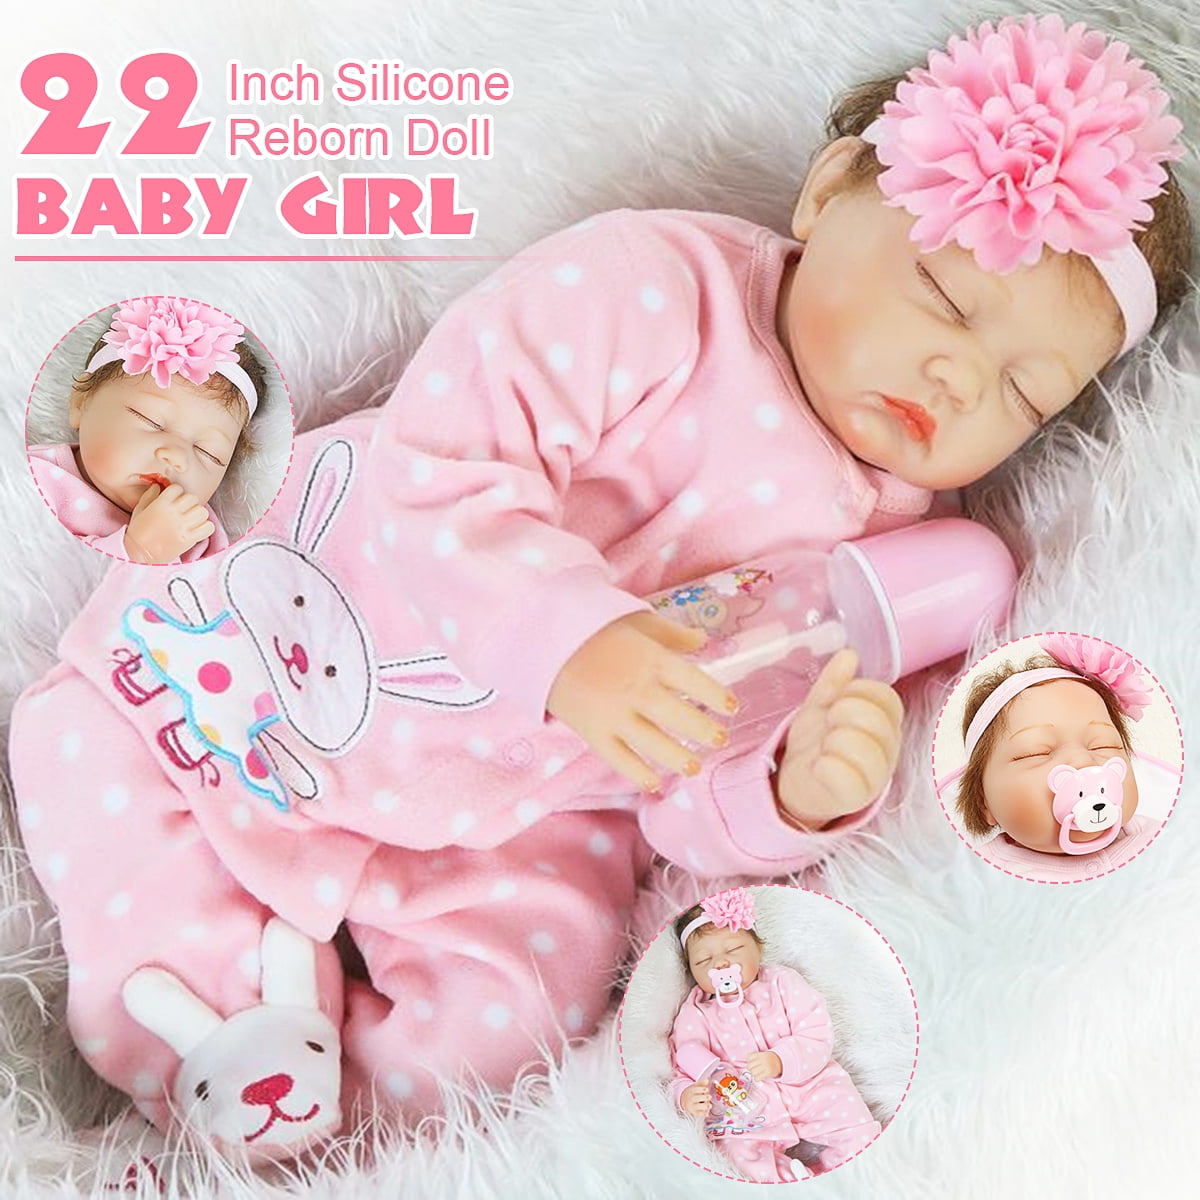 HANDMADE CLOTHES FOR BAby 0-3mths /REBORN doll 16 white/spot two piece  set NEW 